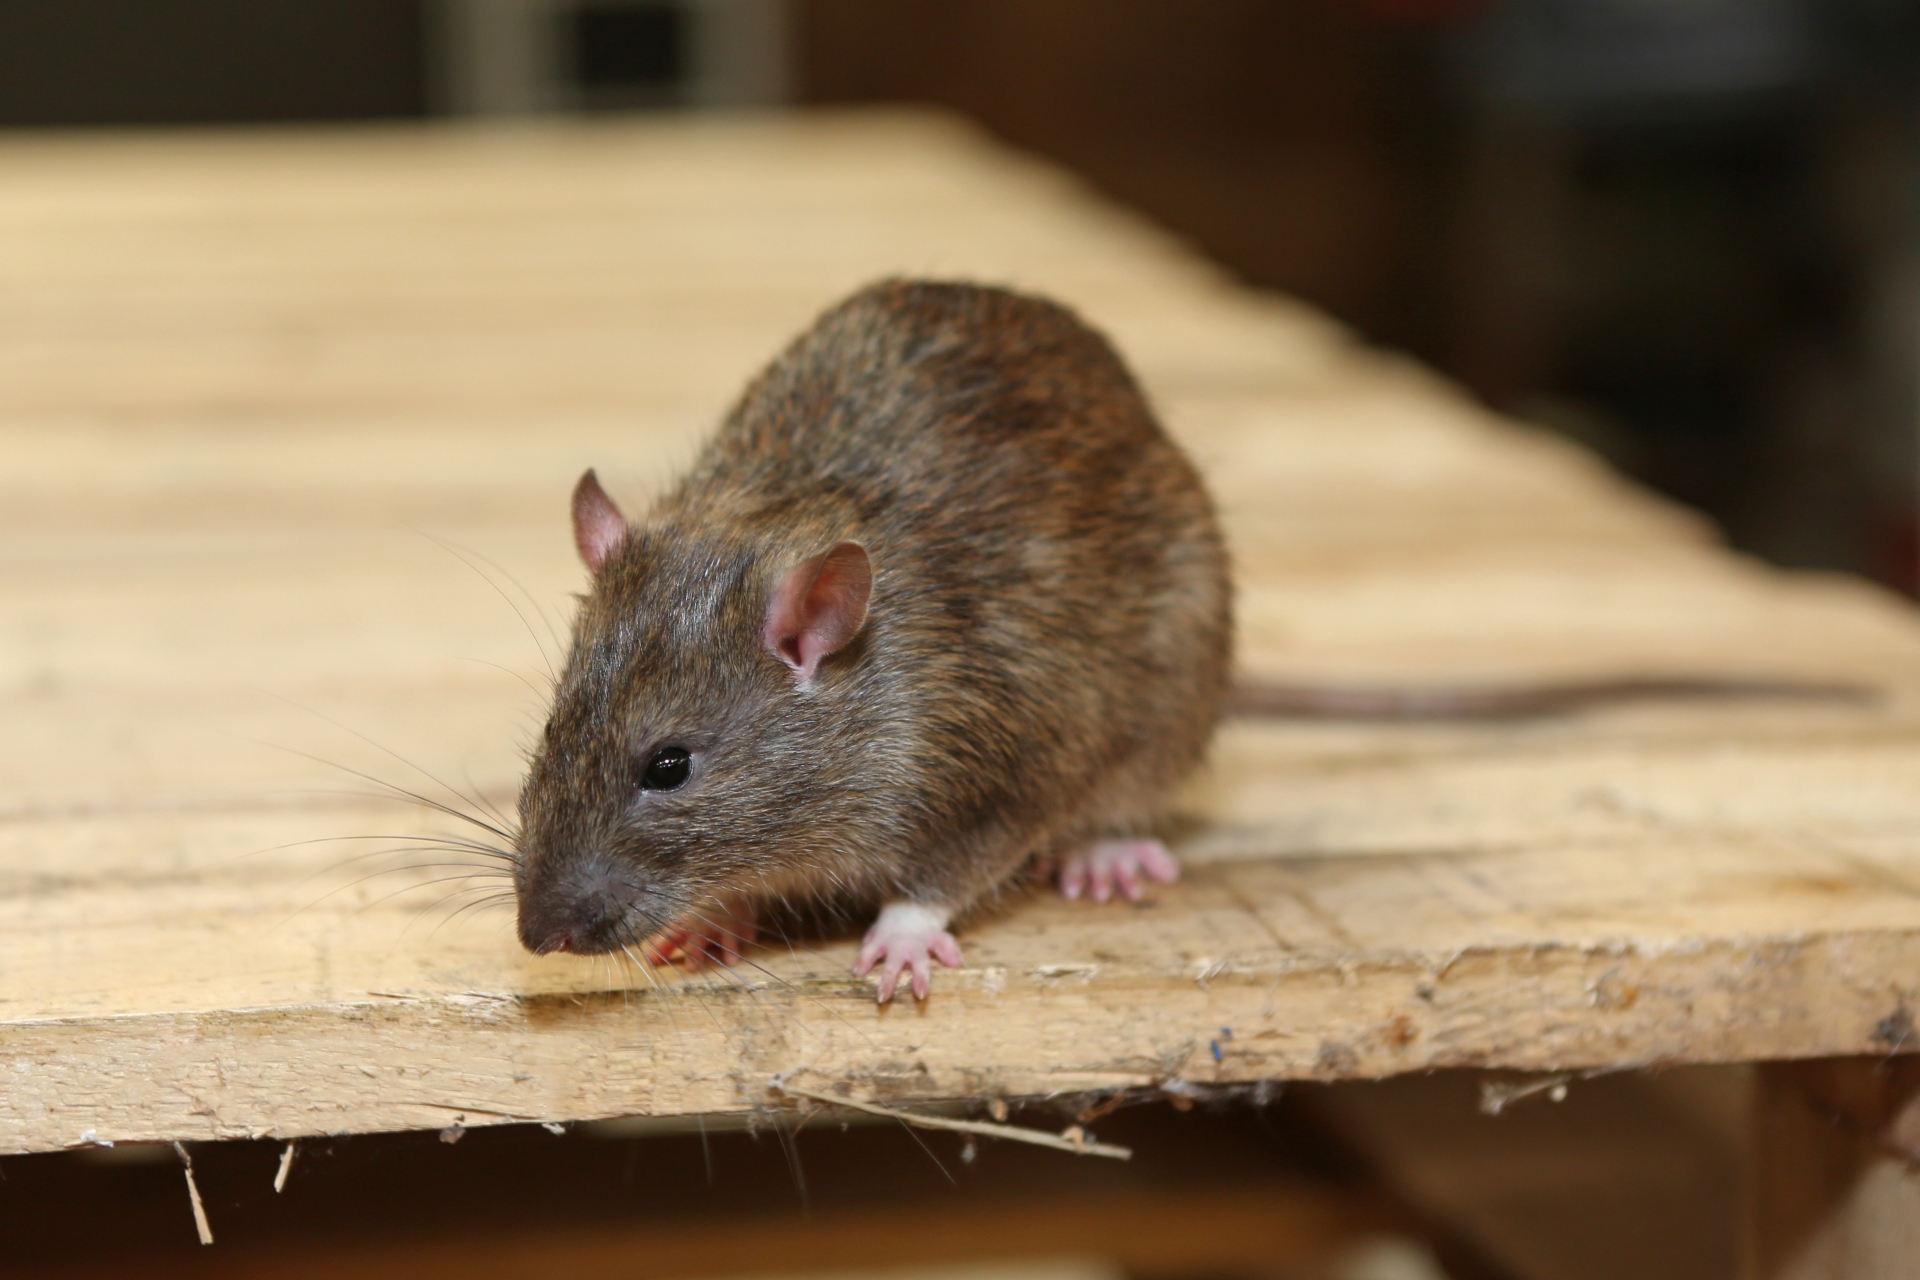 Rat Control, Pest Control in Earlsfield, SW18. Call Now 020 8166 9746